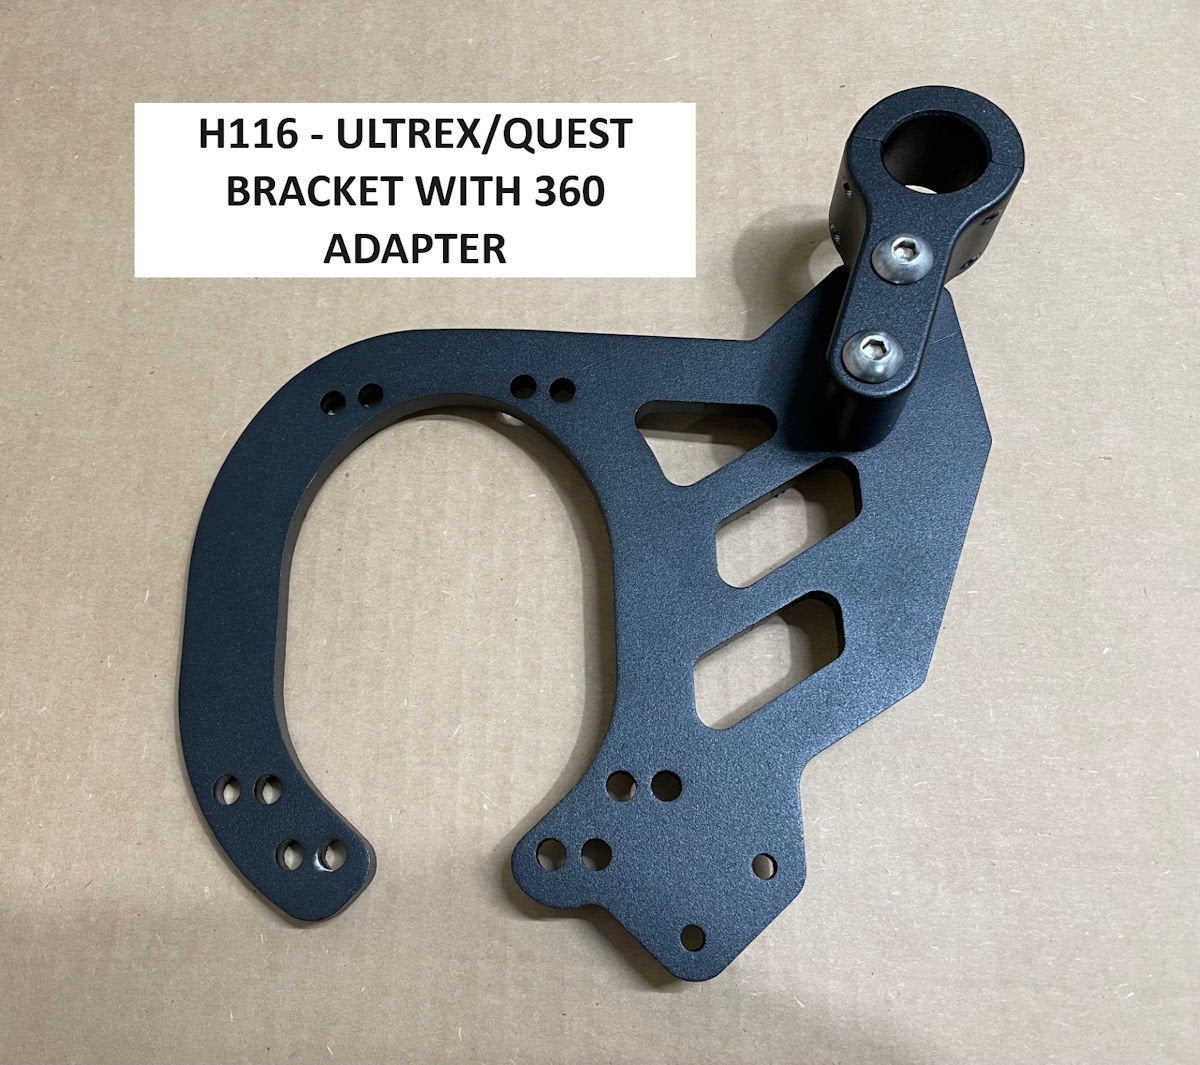 Ultrex/Quest Mega 360 bracket with adapter